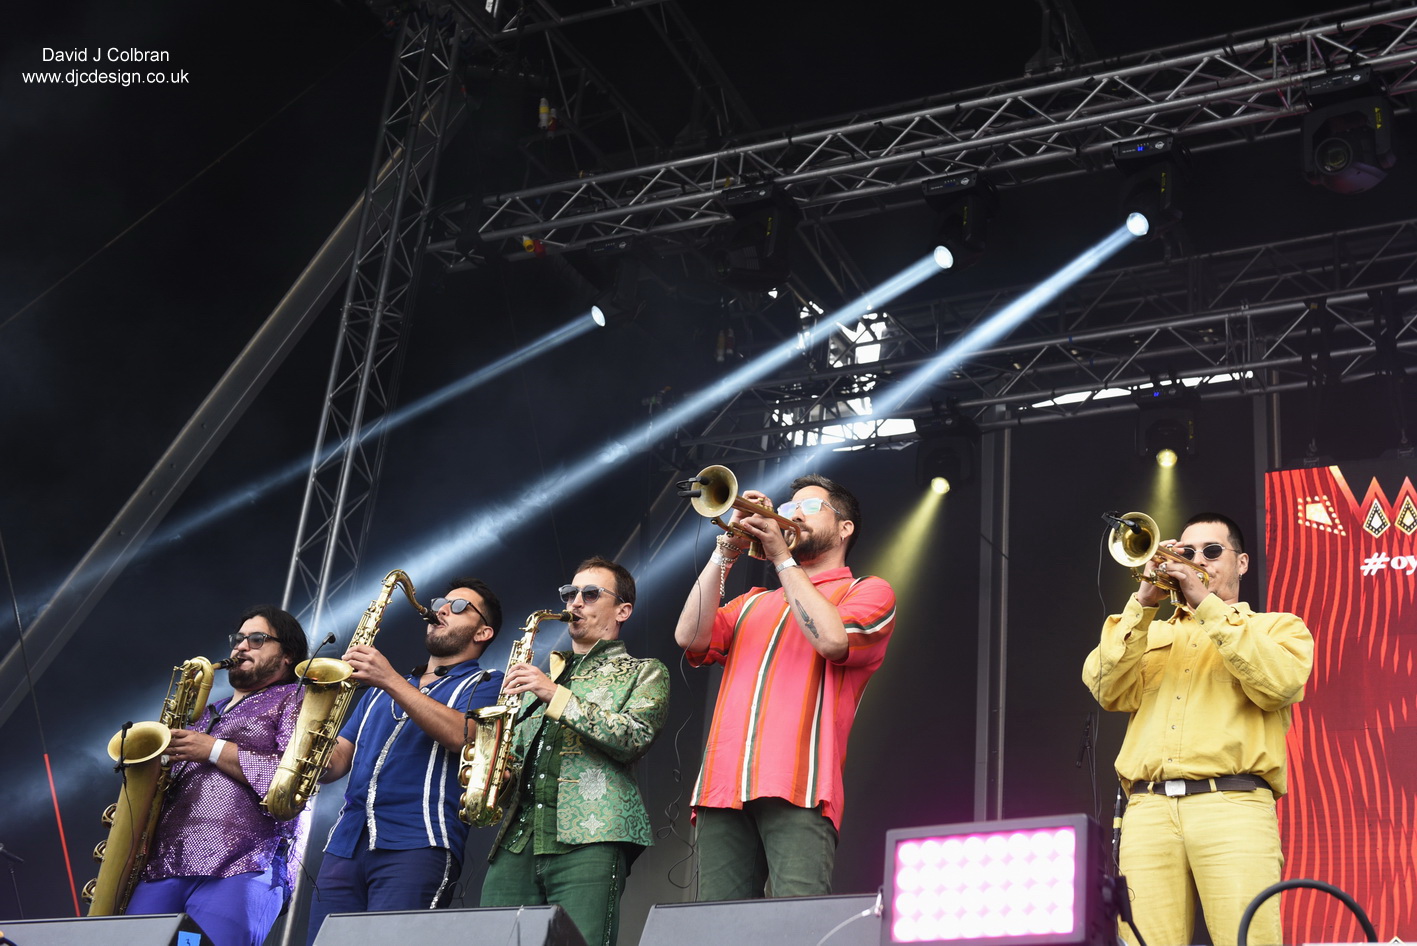 NEWEN AFROBEAT Afrobeat band from Chile at the Africa Oye Festival 2022, Liverpool, UK